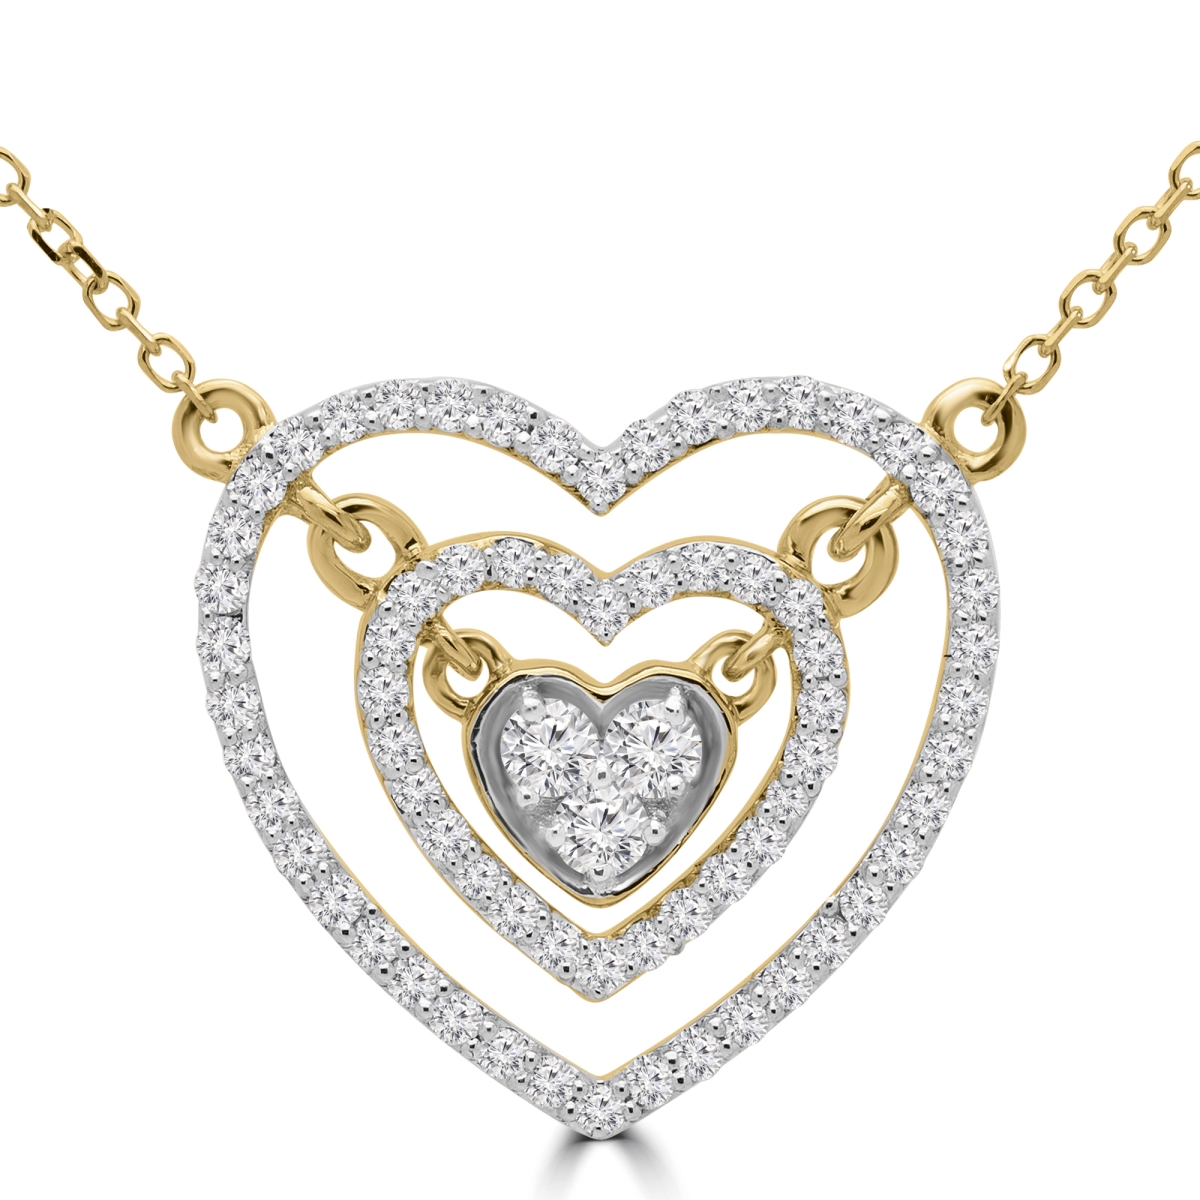 Mdr190039 0.33 Ctw Round Diamond Double Halo Cluster Heart Pendant Necklace In 14k Yellow Gold With Chain